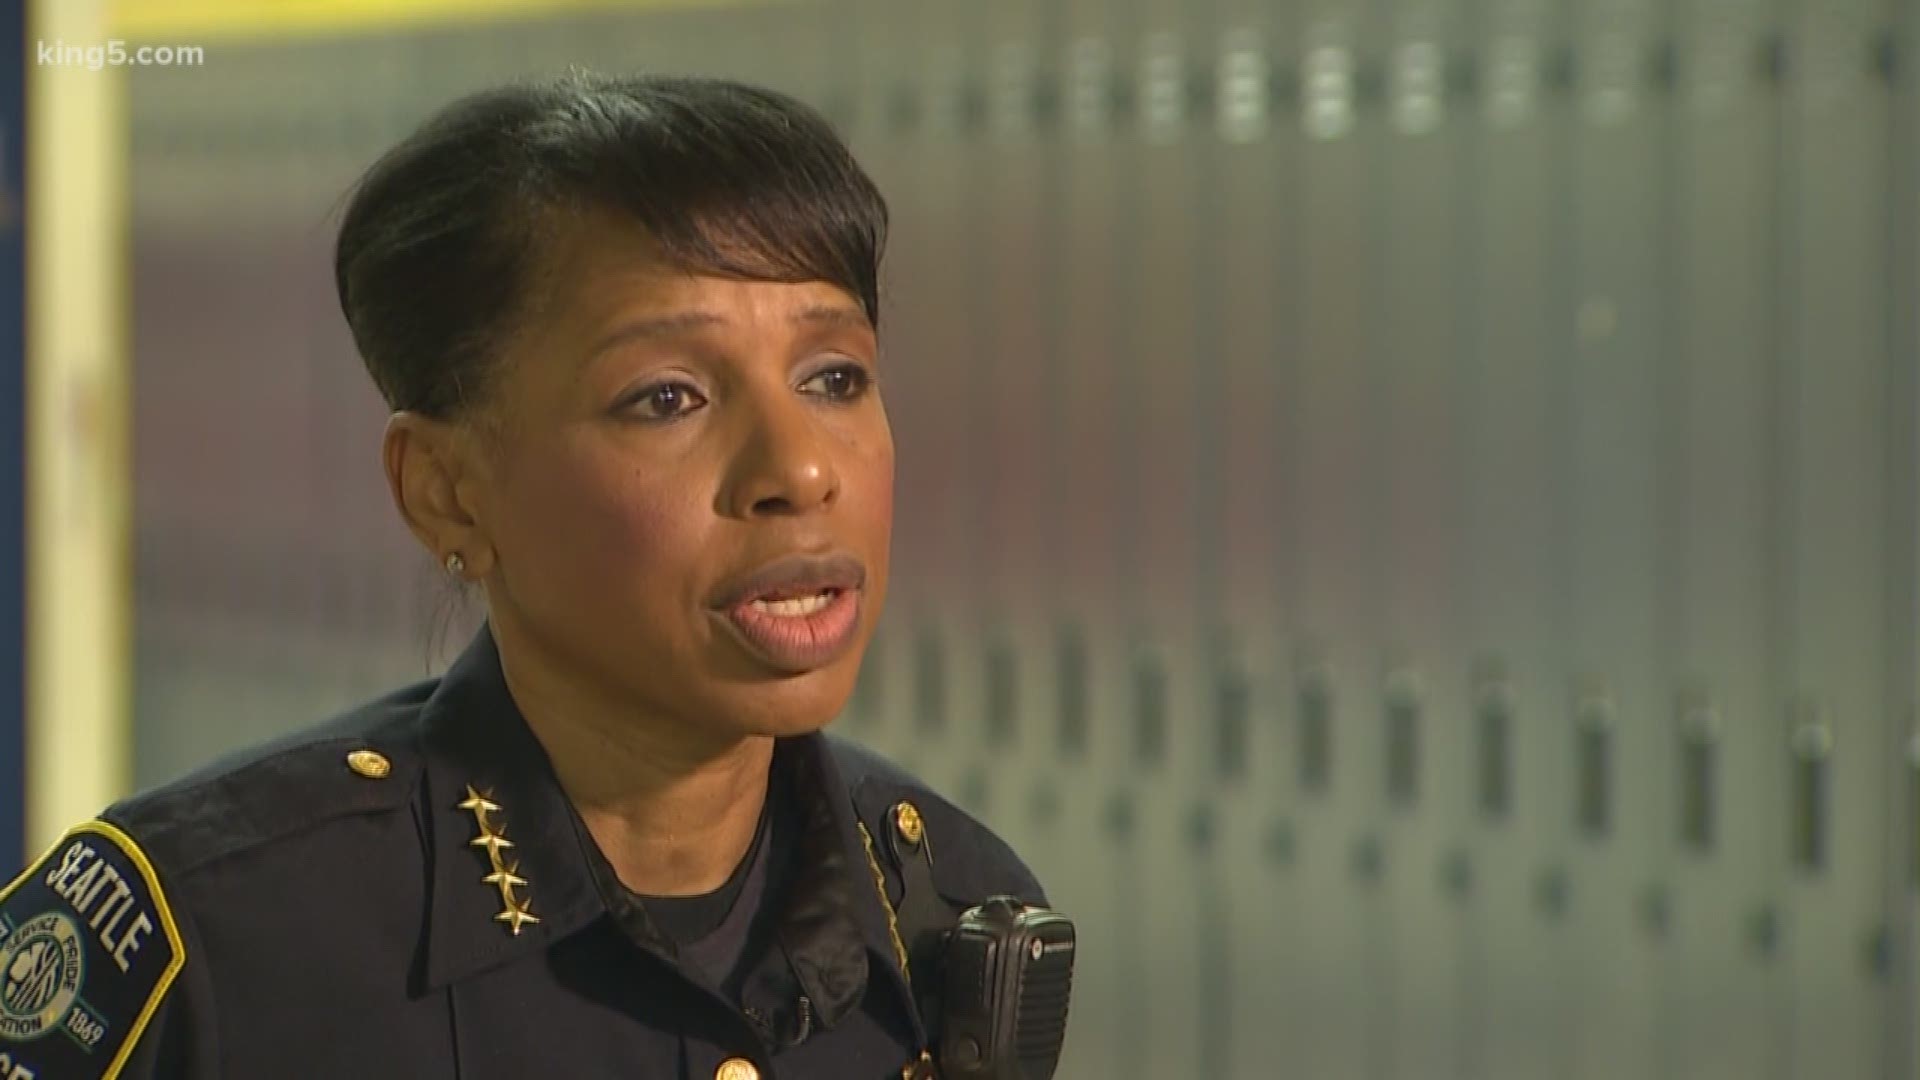 A commission wants to know why Interim Seattle Police Chief Carmen Best was not included in the list of finalists.